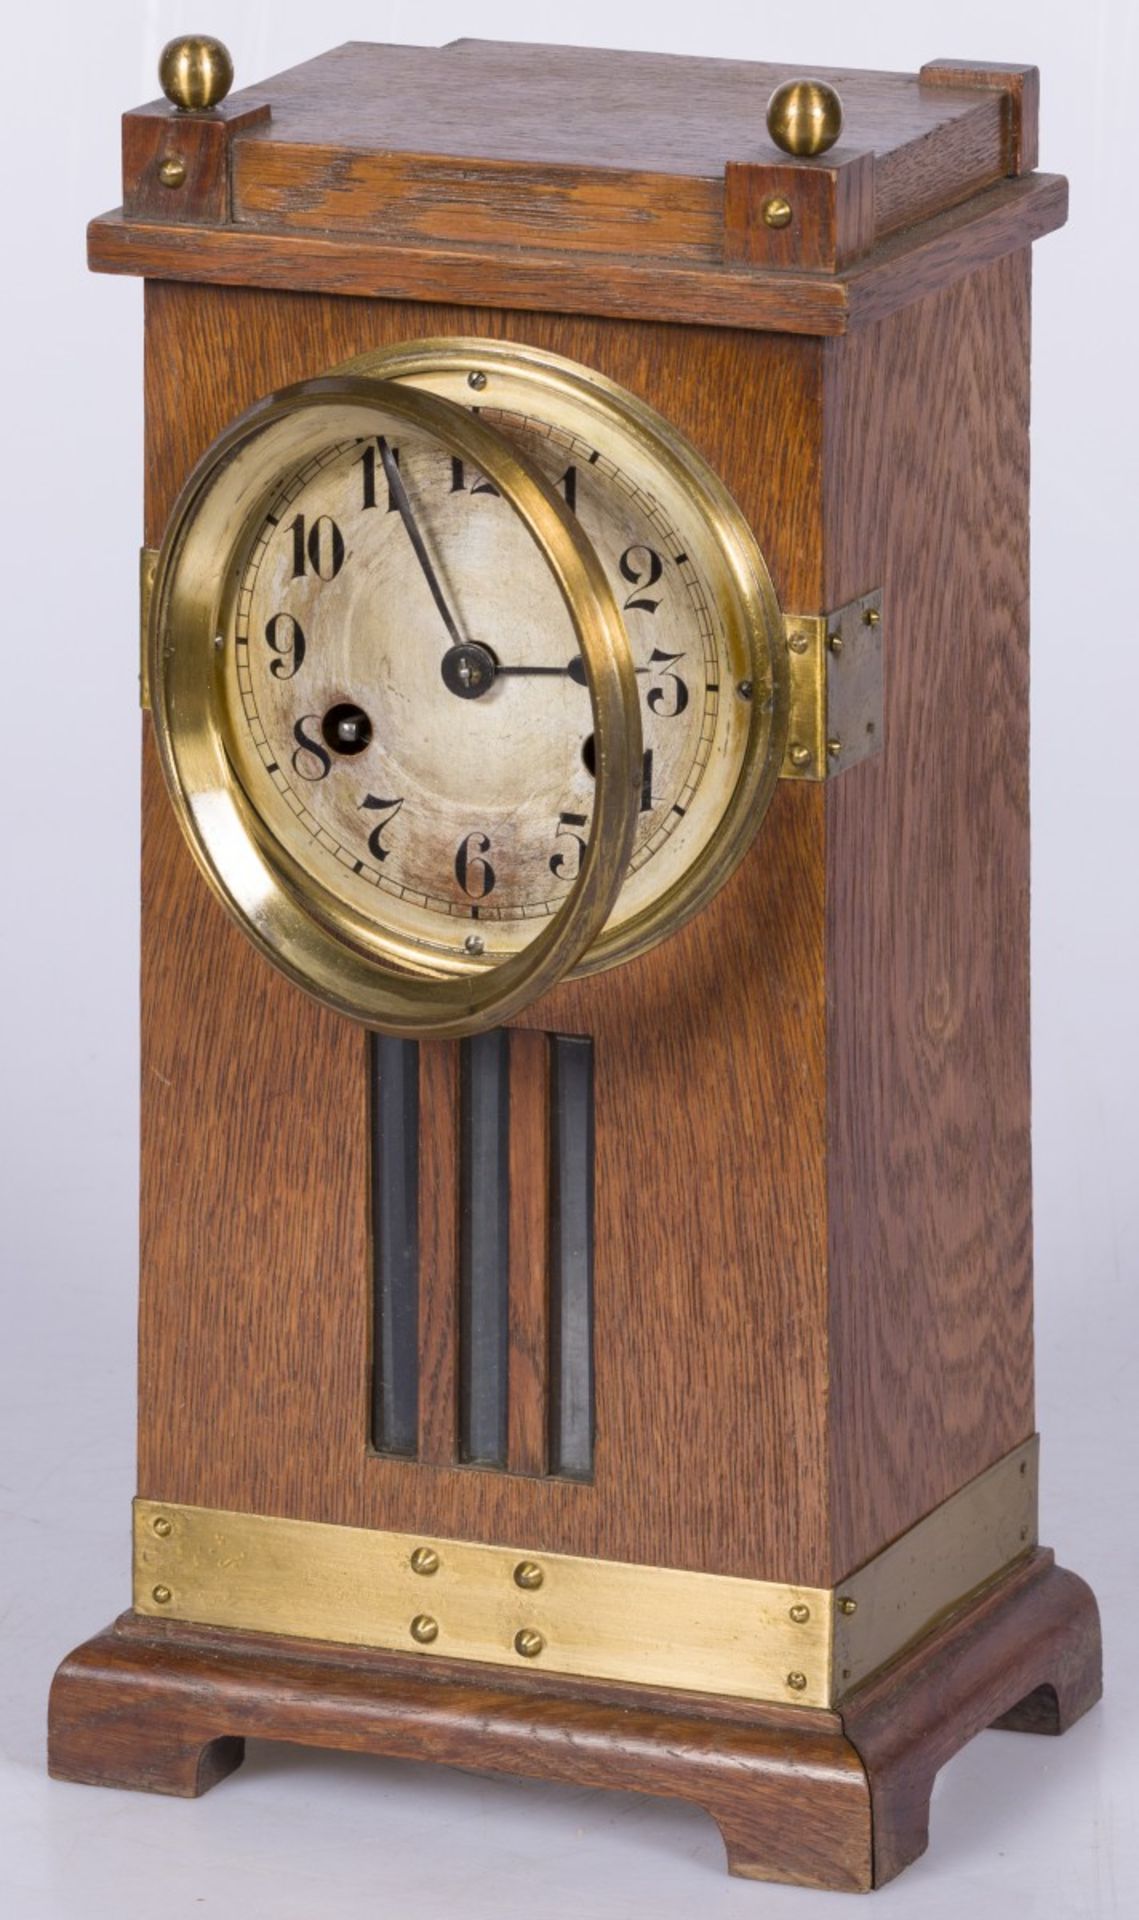 An European 'Arts & Crafts' style oak mantle clock with brass fittings.